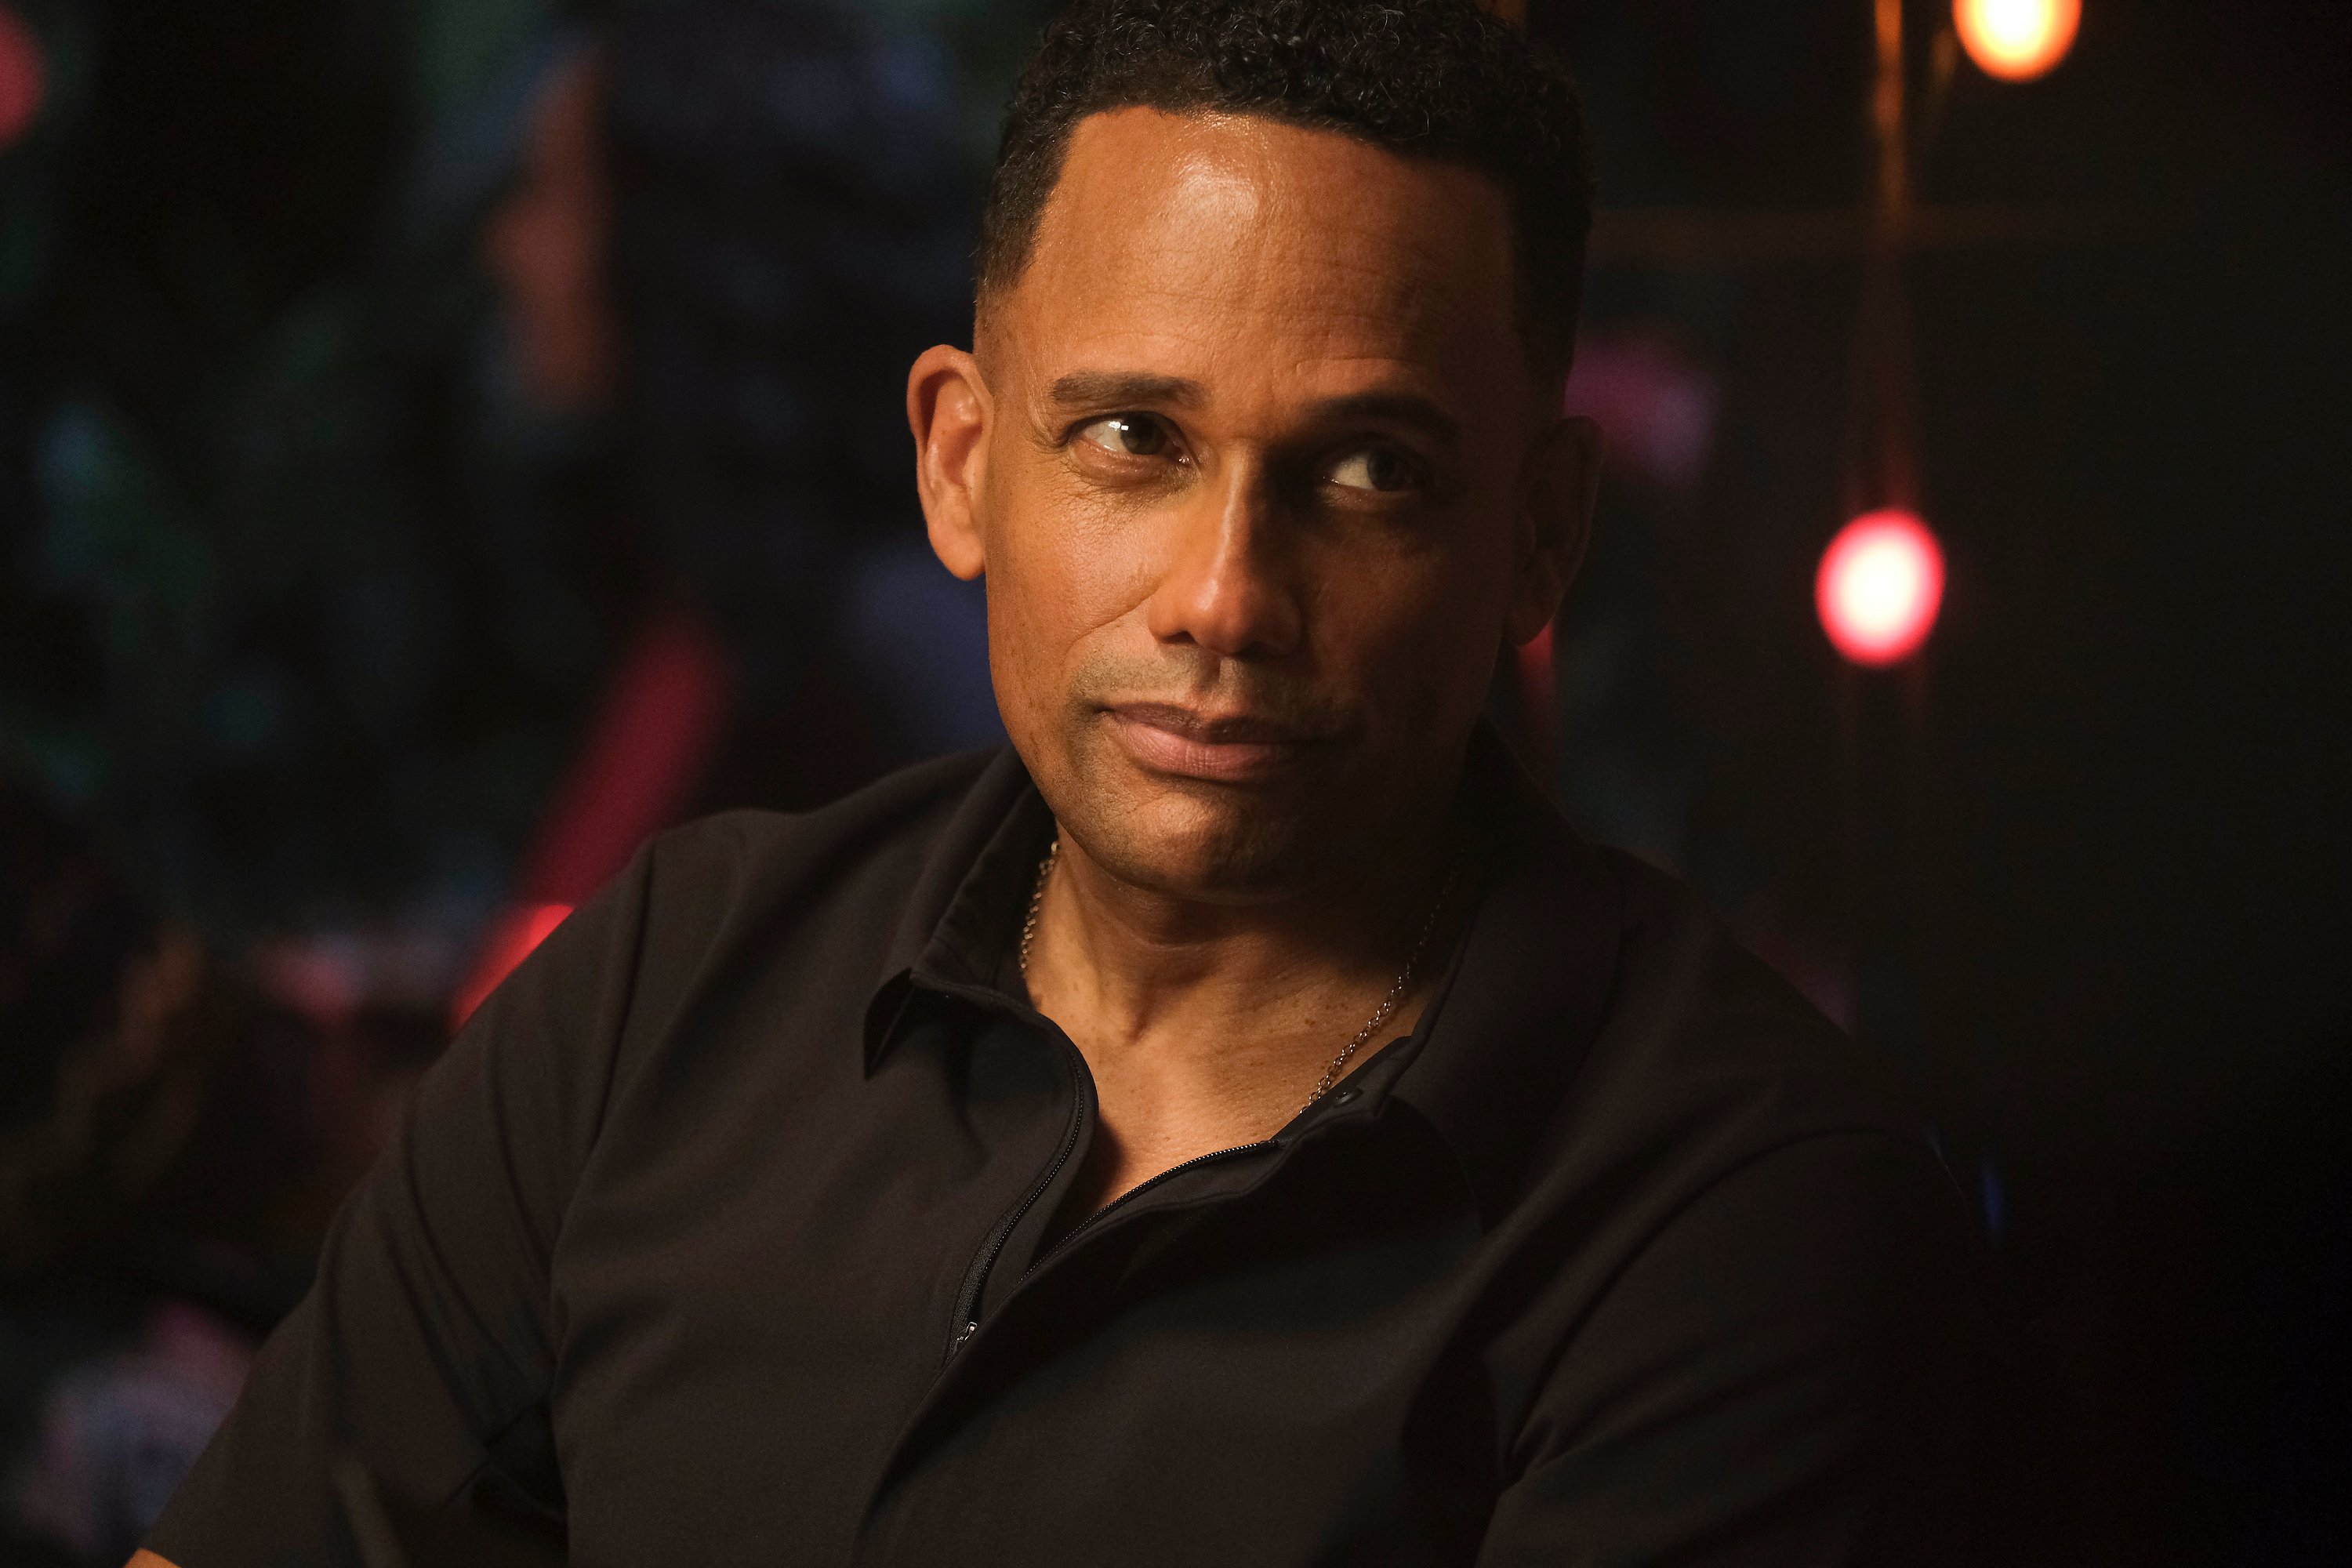 Hill Harper as Dr. Marcus Andrews